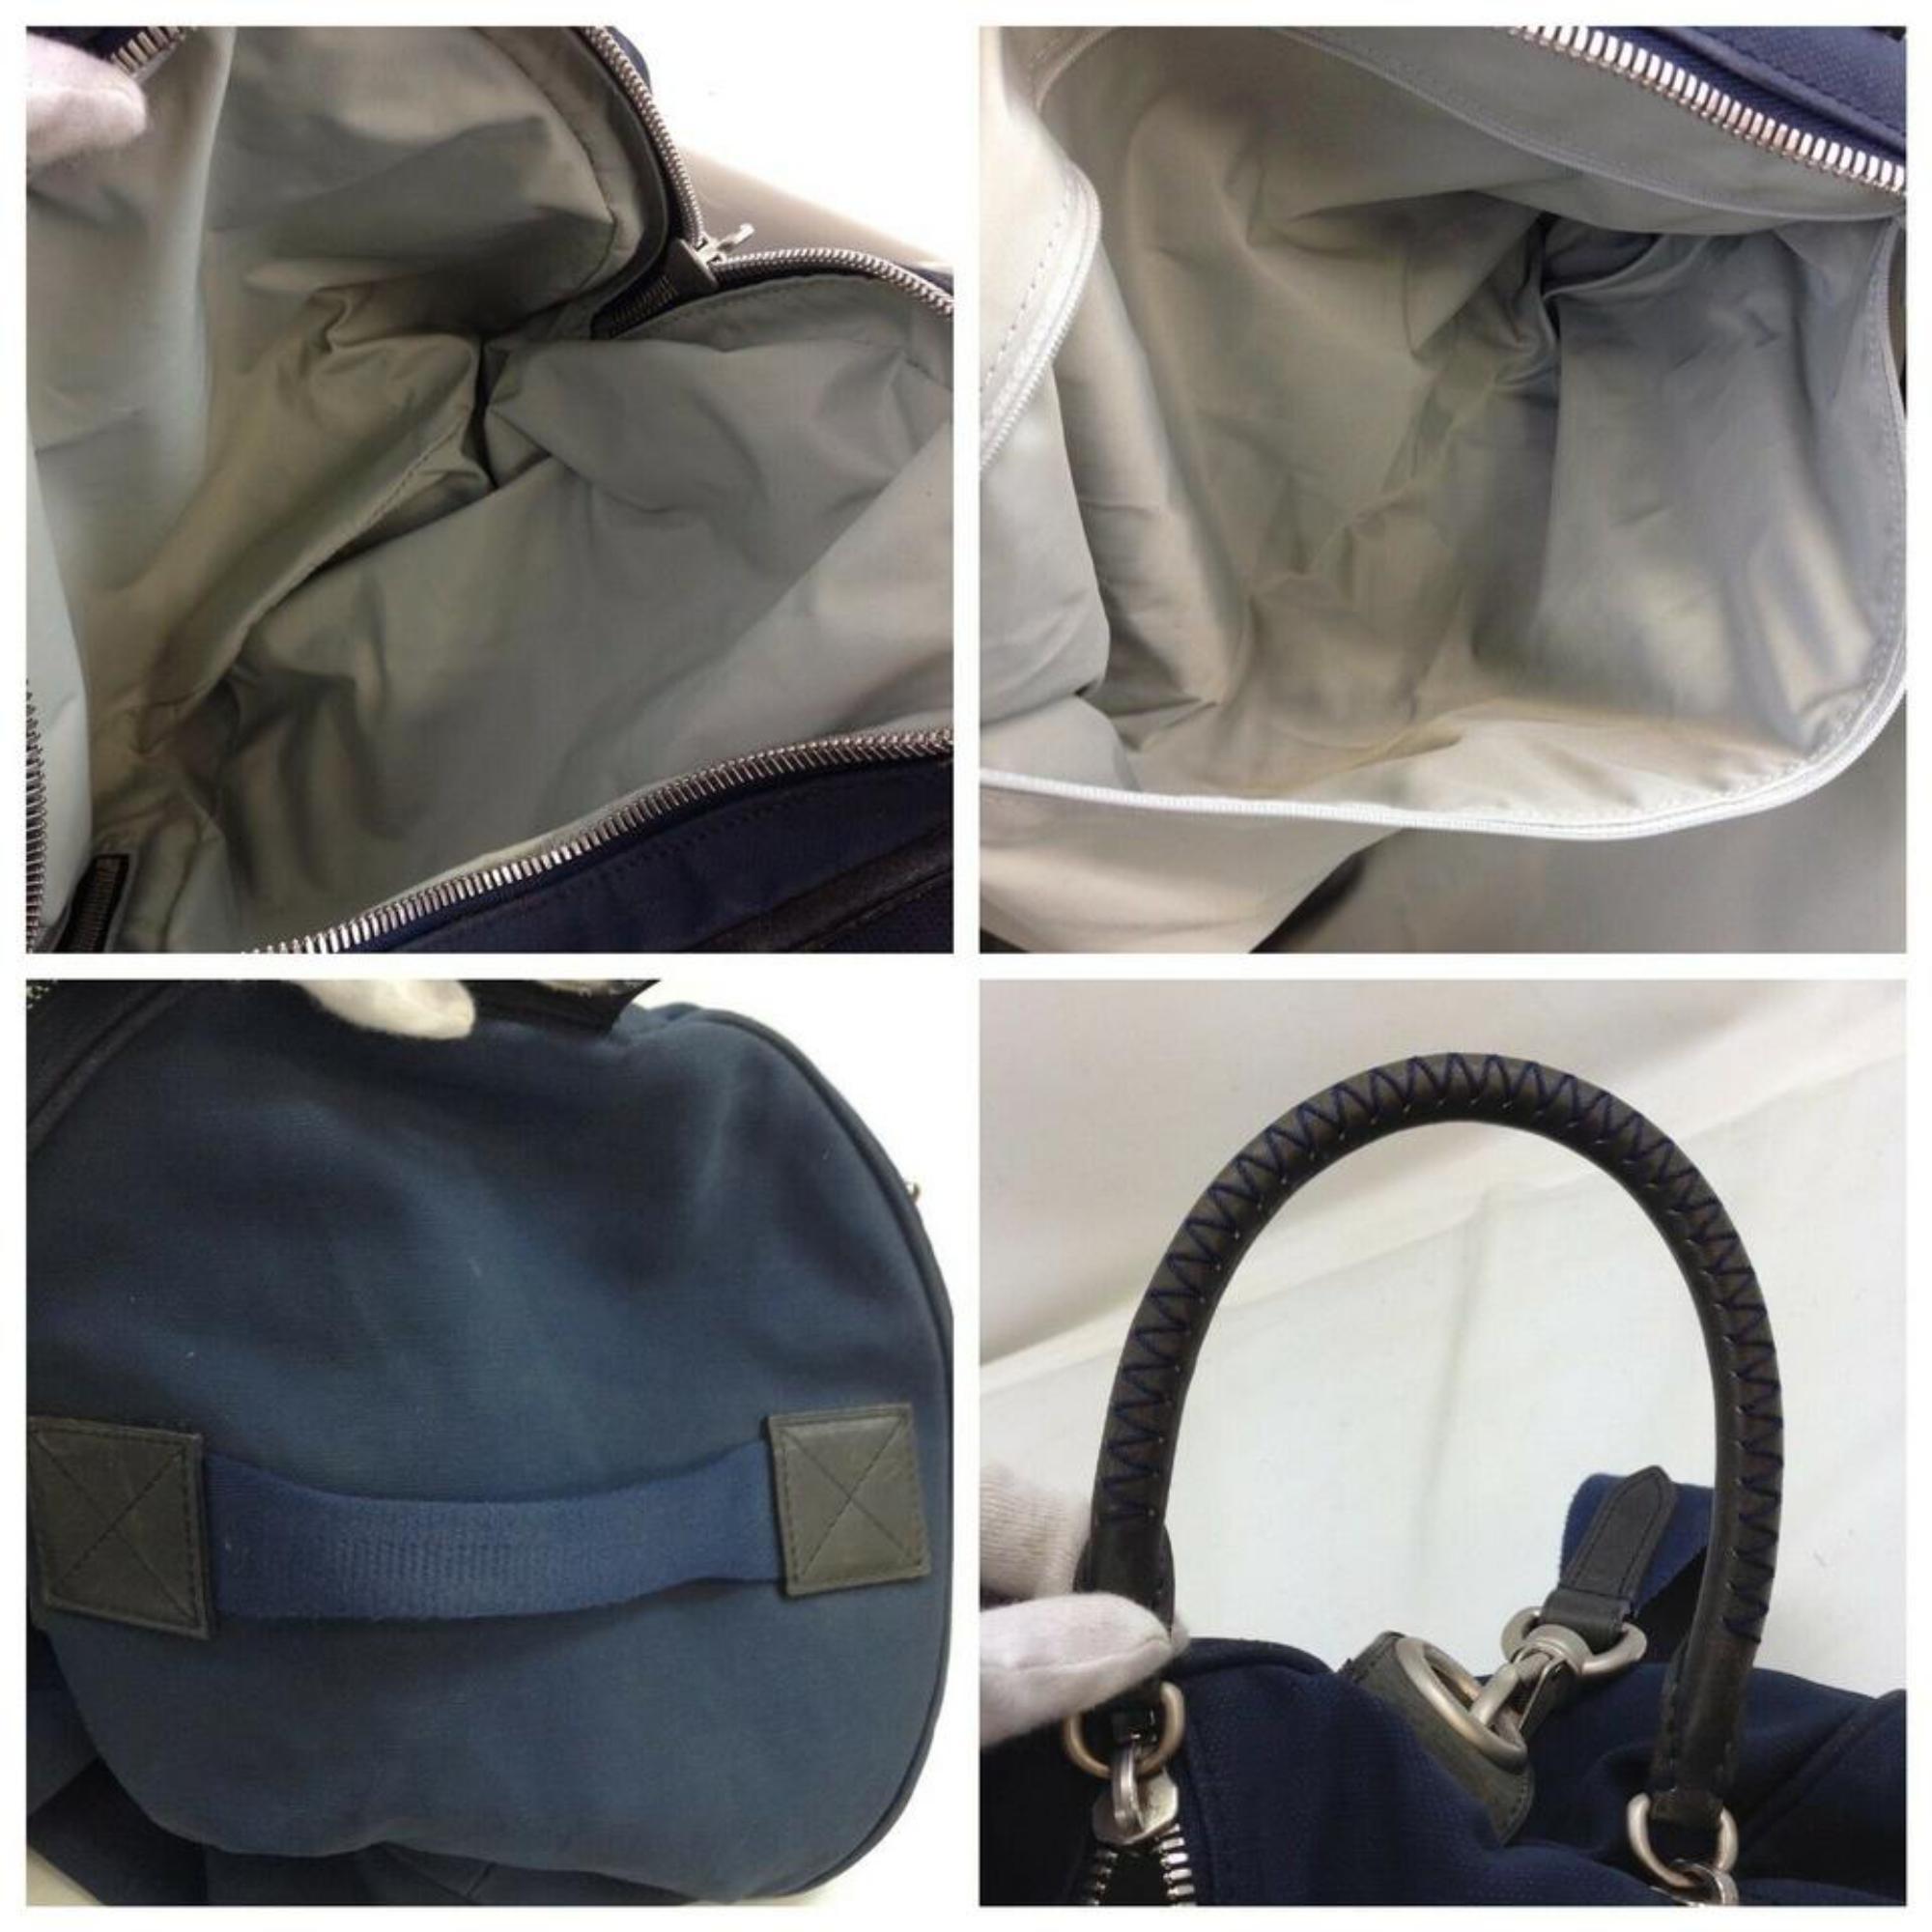 Louis Vuitton Duffle Lv Cup Gaston V Boston 870305 Blue Canvas Shoulder Bag In Fair Condition For Sale In Forest Hills, NY